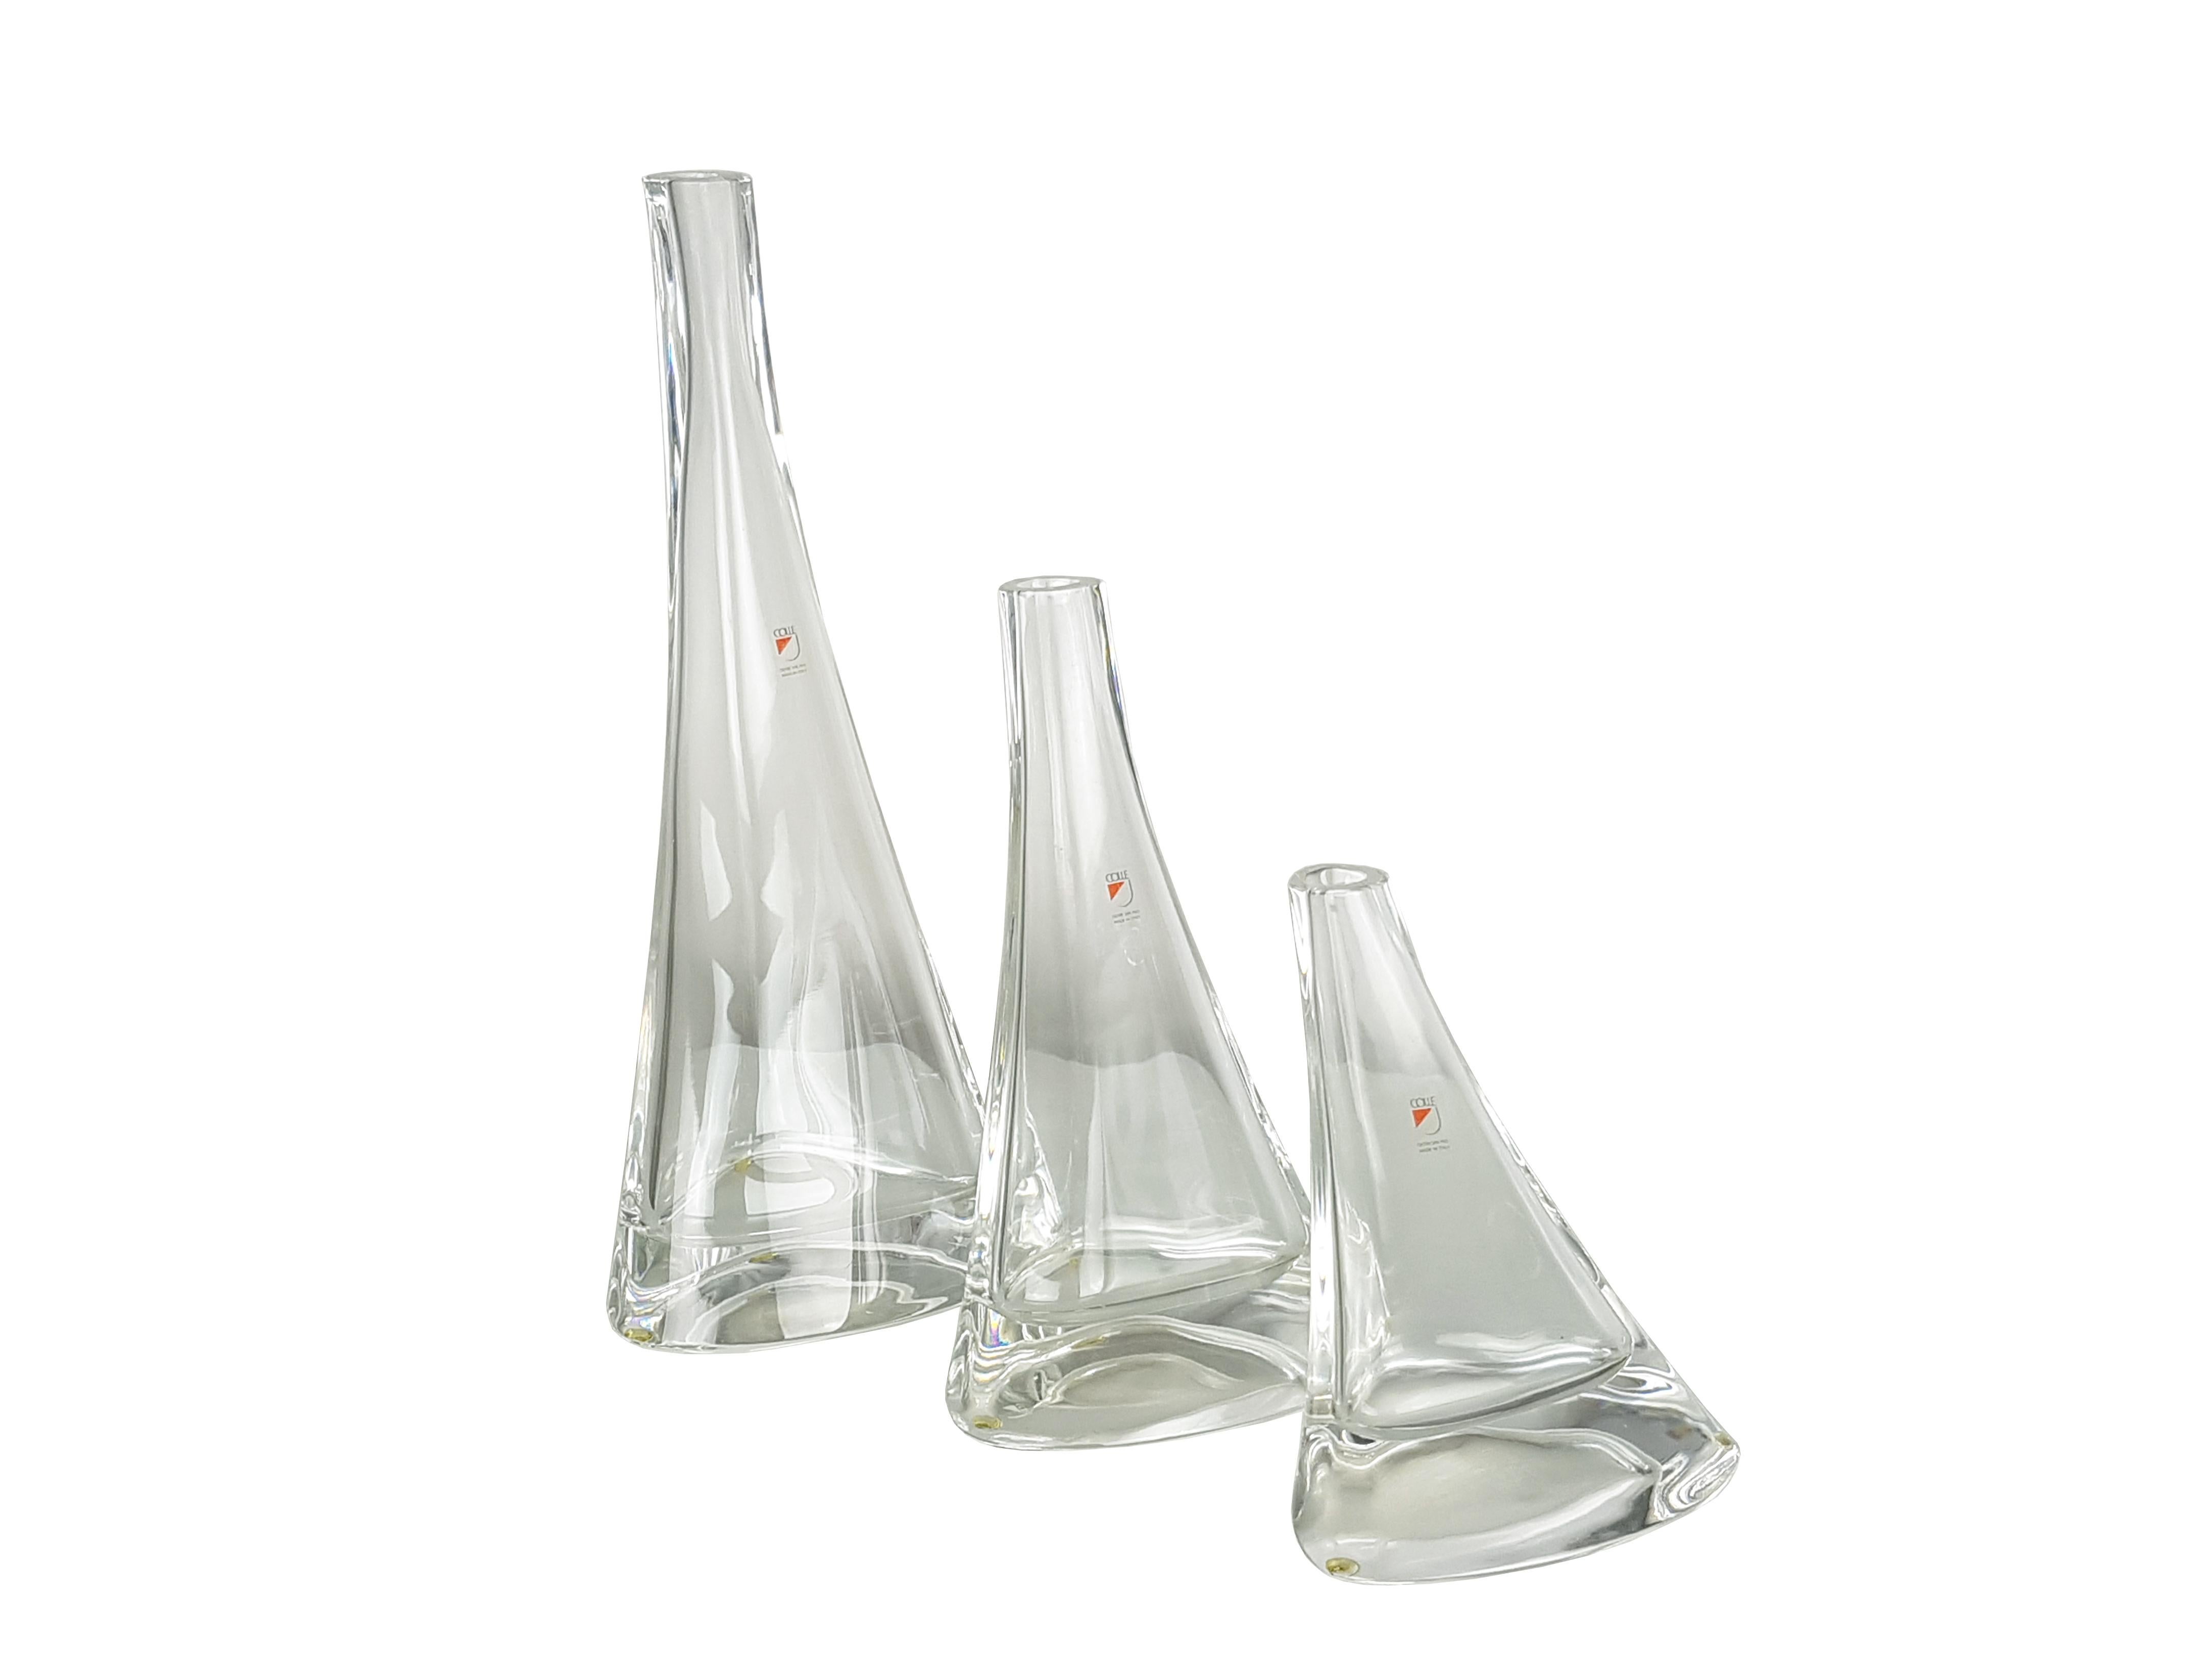 Set of 3 soliflower vases designed by Mangiarotti for Colle, a Tuscany glass manufacturer. This set belongs to an extensive collection of vases and tableware produced in the 1980s.
Very good condition. Sign of the maker printed on the